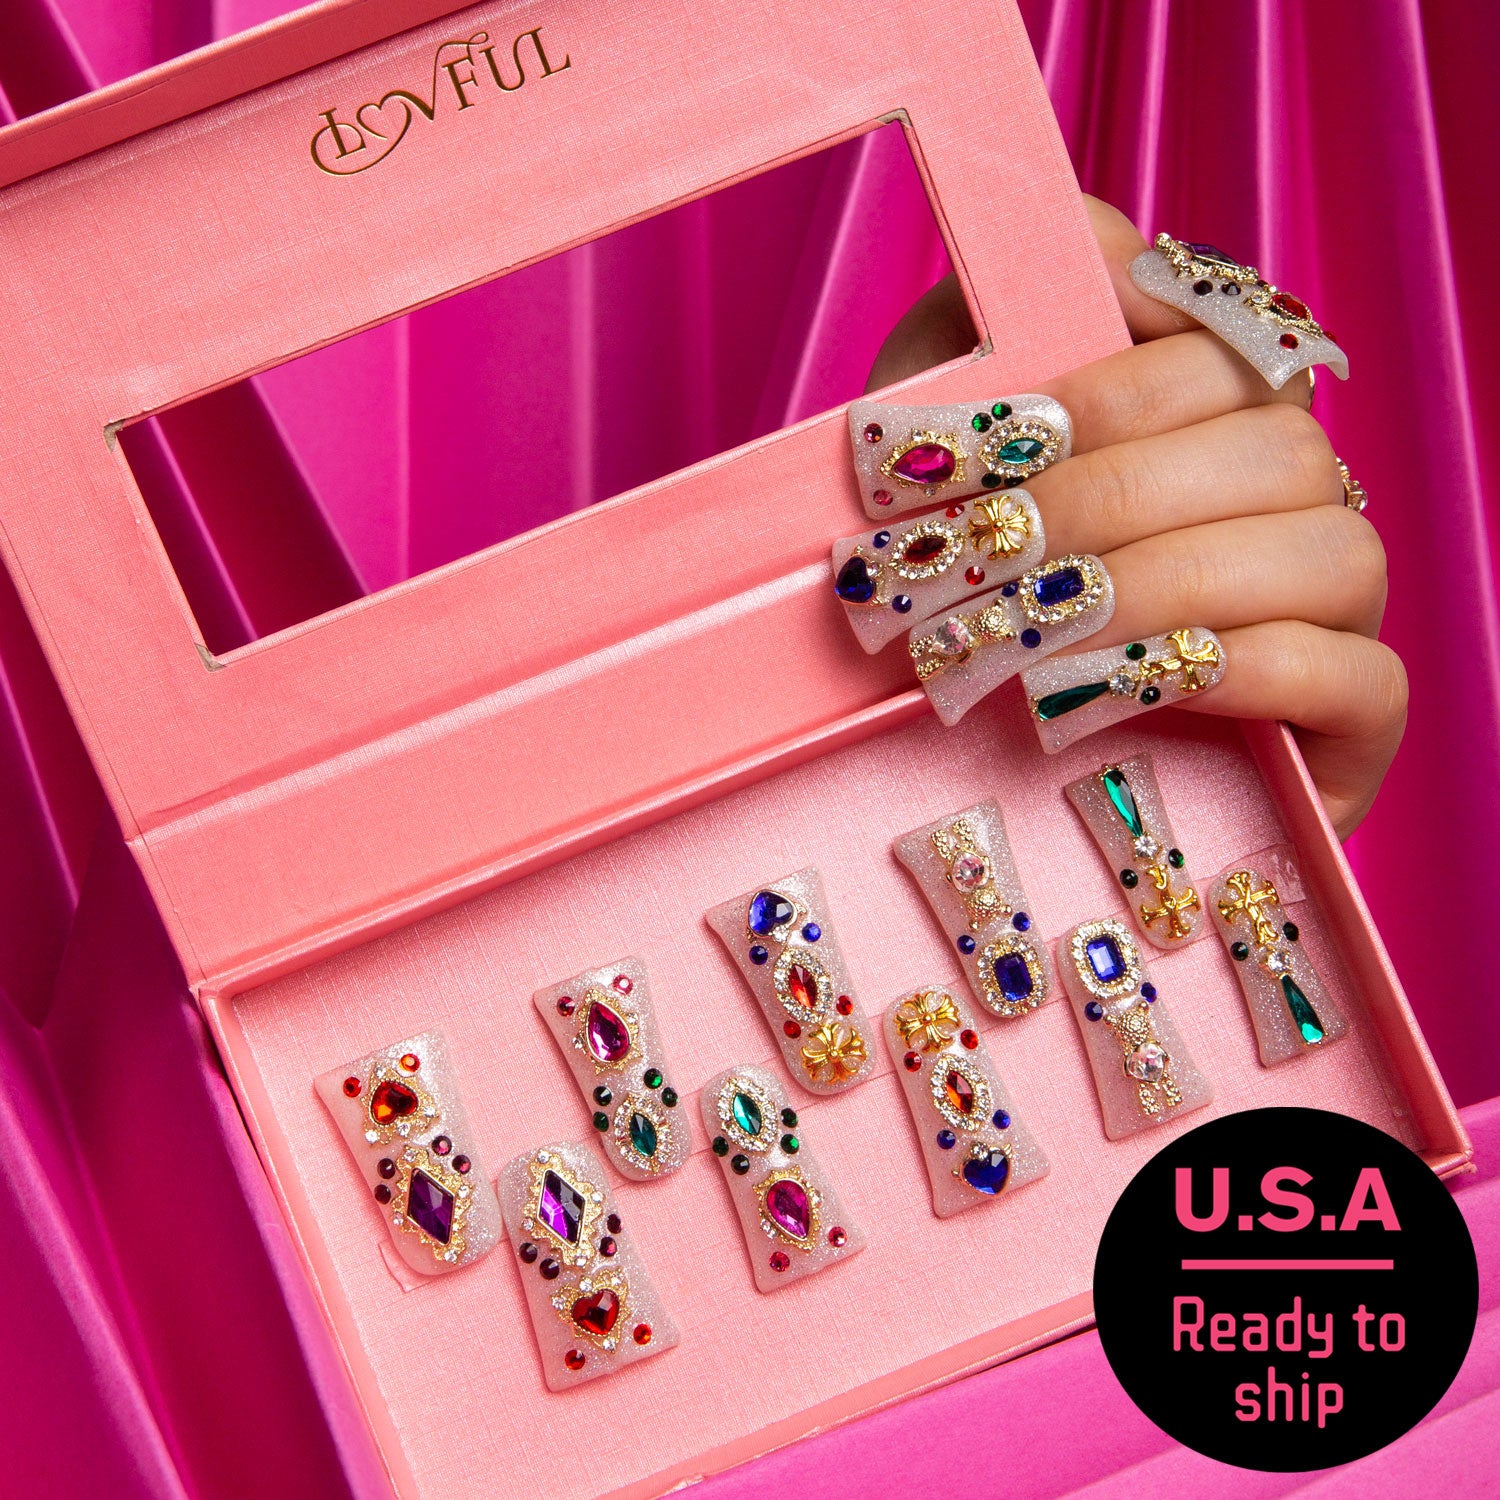 Lovful's Treasure Trove press-on nails adorned with colorful gems and glitter in a pink box. Ready to ship in the USA.